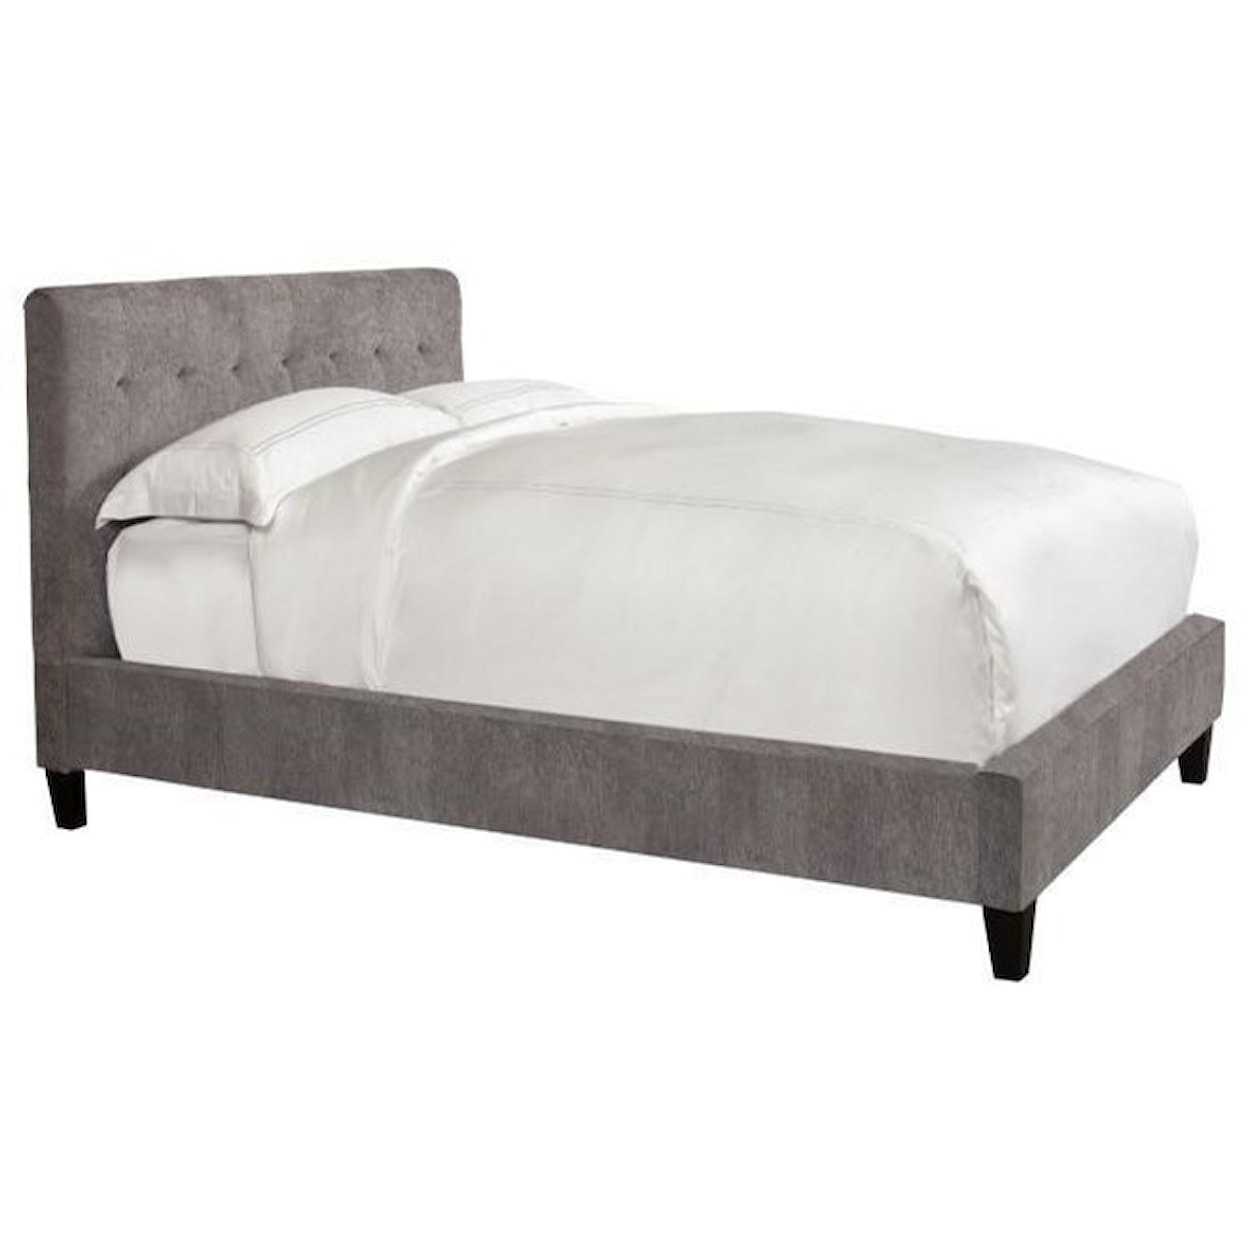 Paramount Living Jody Queen Upholstered Bed